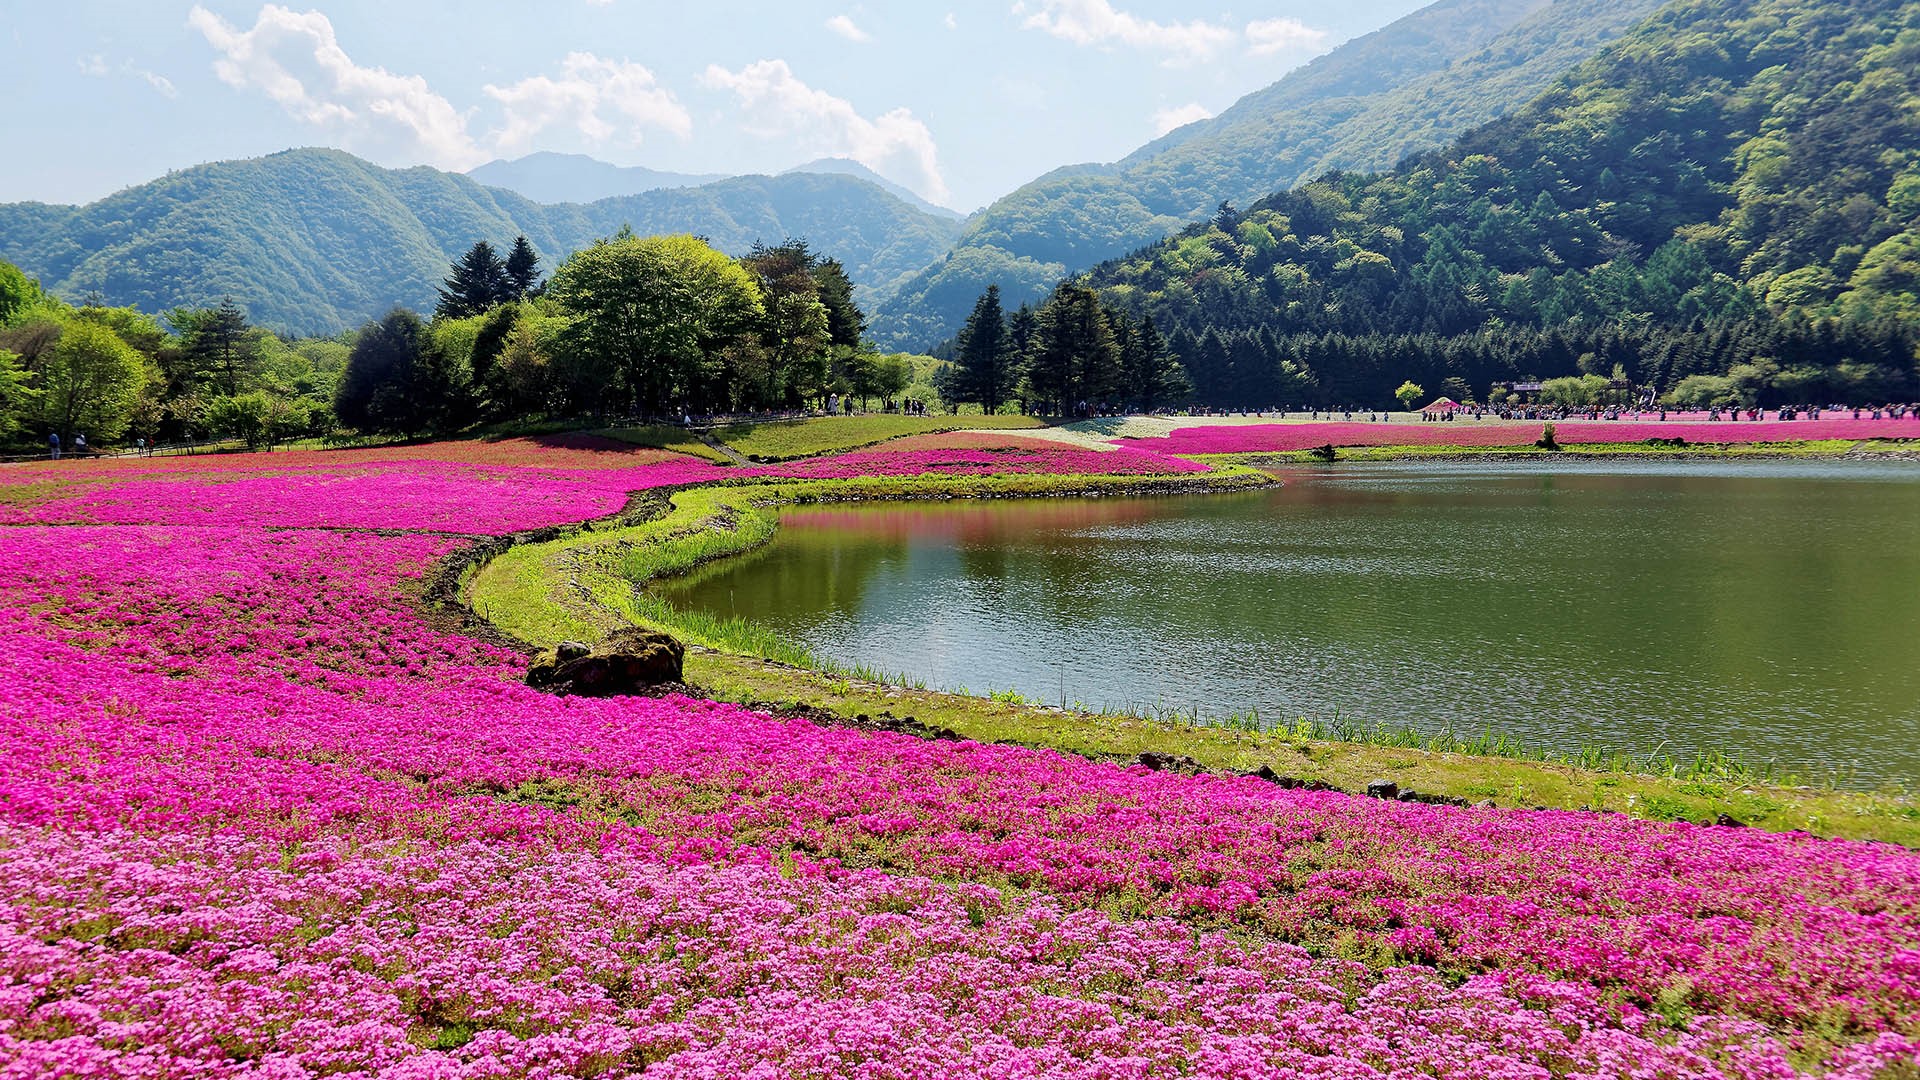 General 1920x1080 nature forest mountains trees lake pink flowers clouds Yamanashi Japan